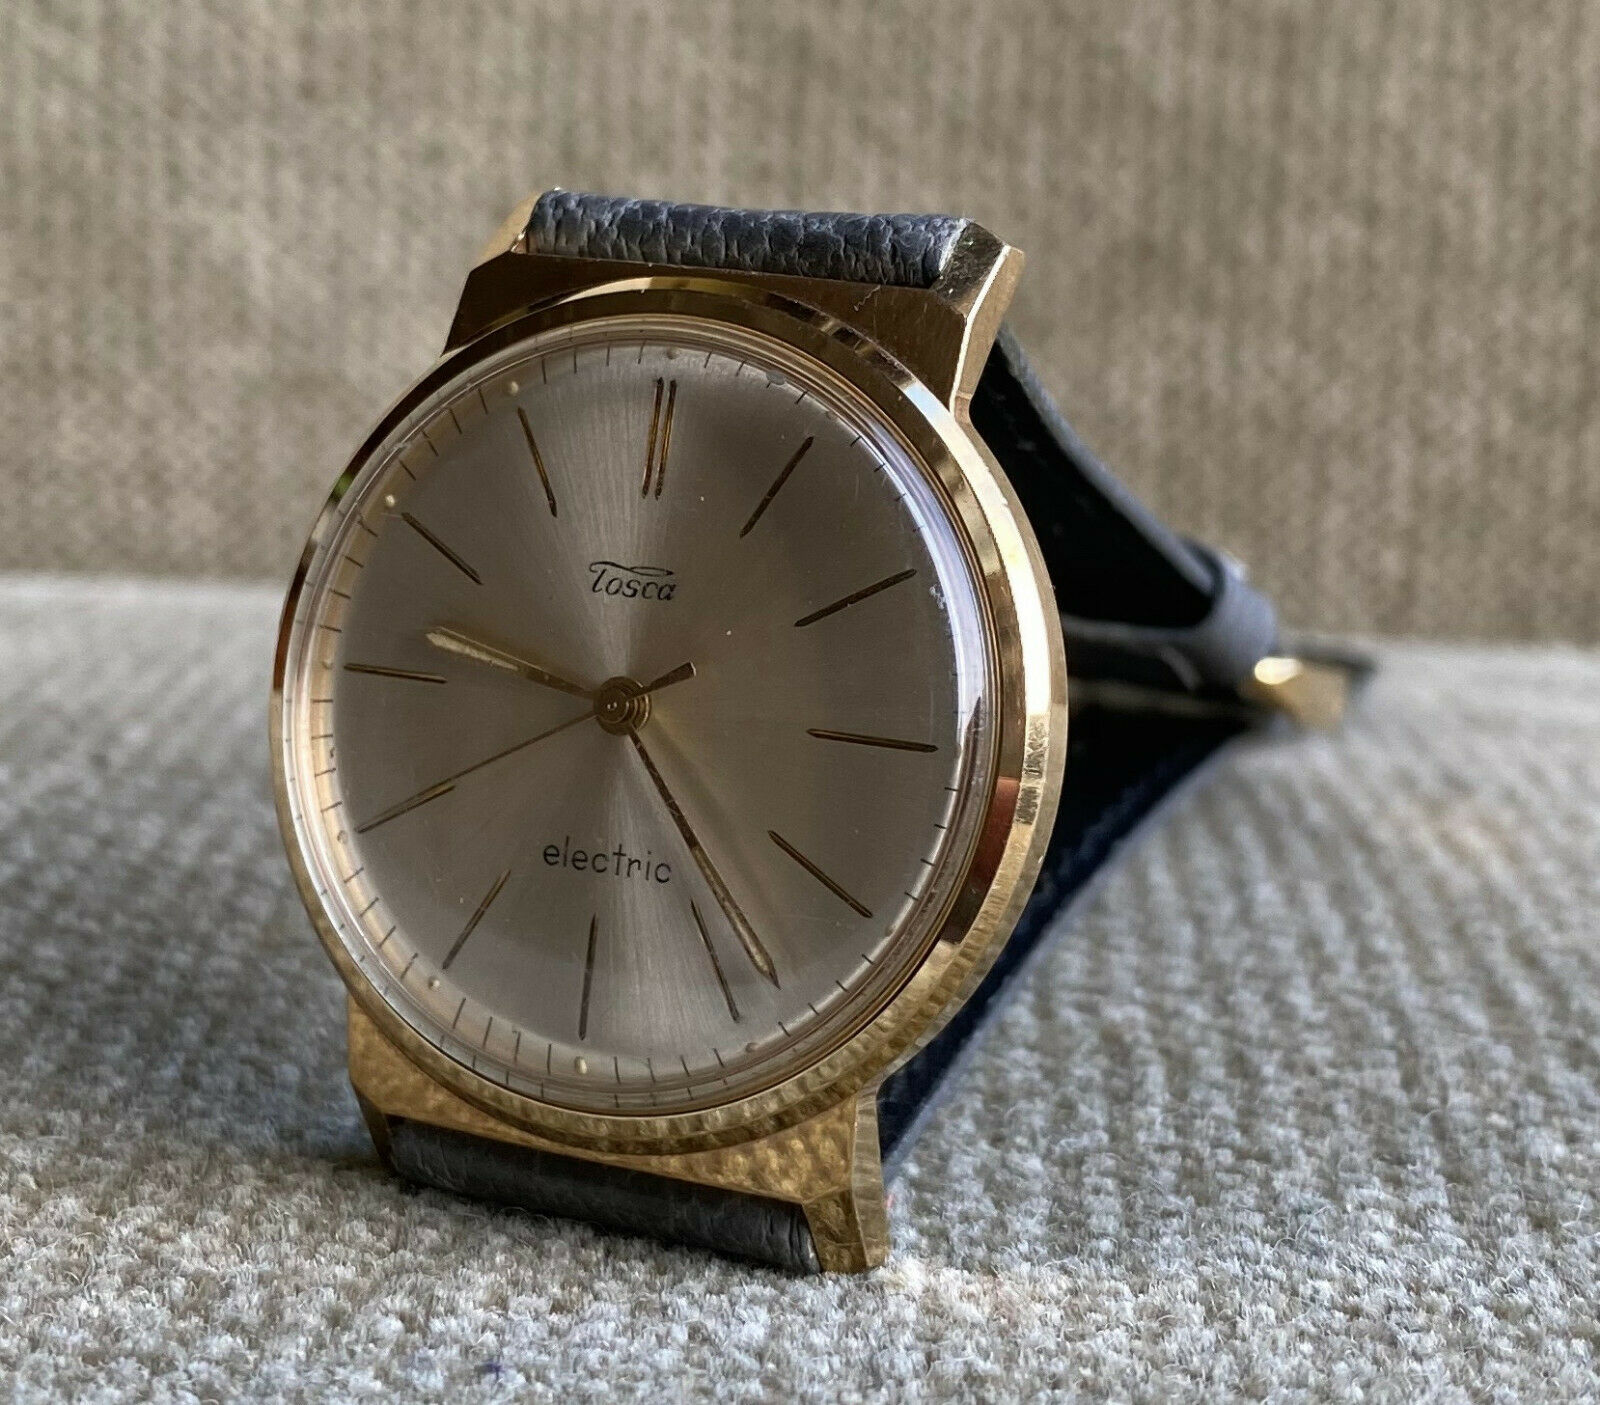 Raymond Weil Vintage Watch - 3 For Sale on 1stDibs | raymond weil vintage  mens watches, raymond weil vintage watches, raymond weil watches old models